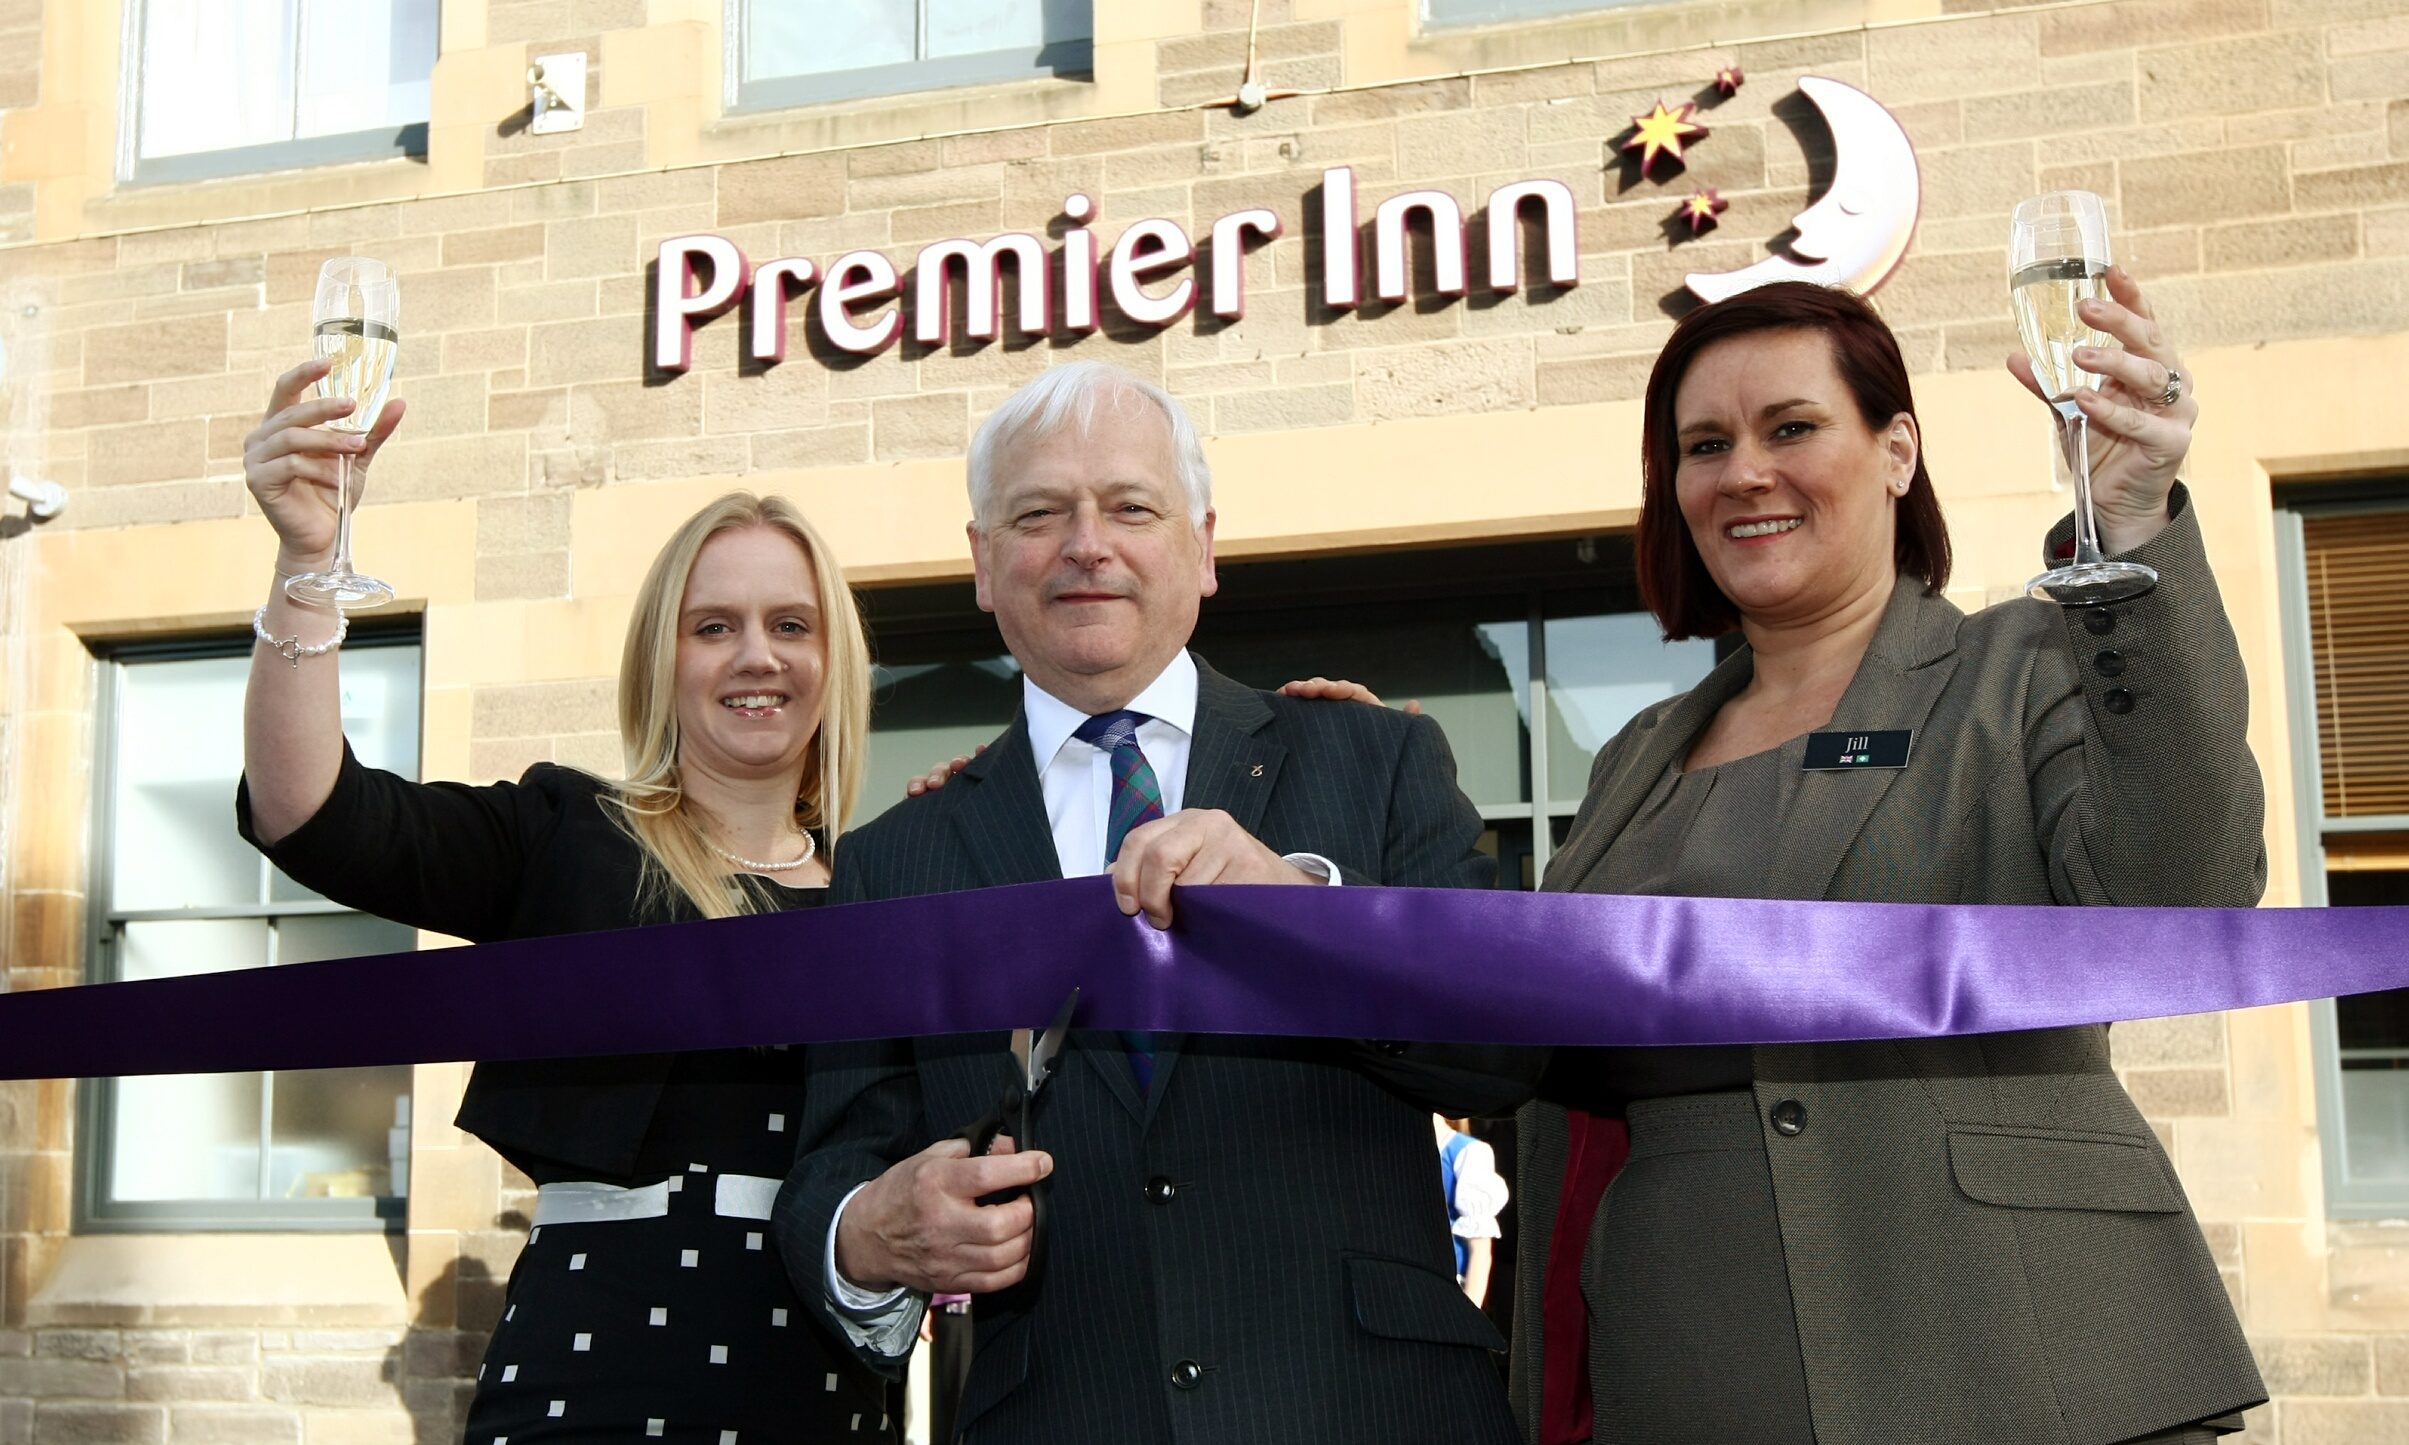 Premier Inn could be celebrating the launch of another Perthshire hotel after unveiling Pitlochry proposals.